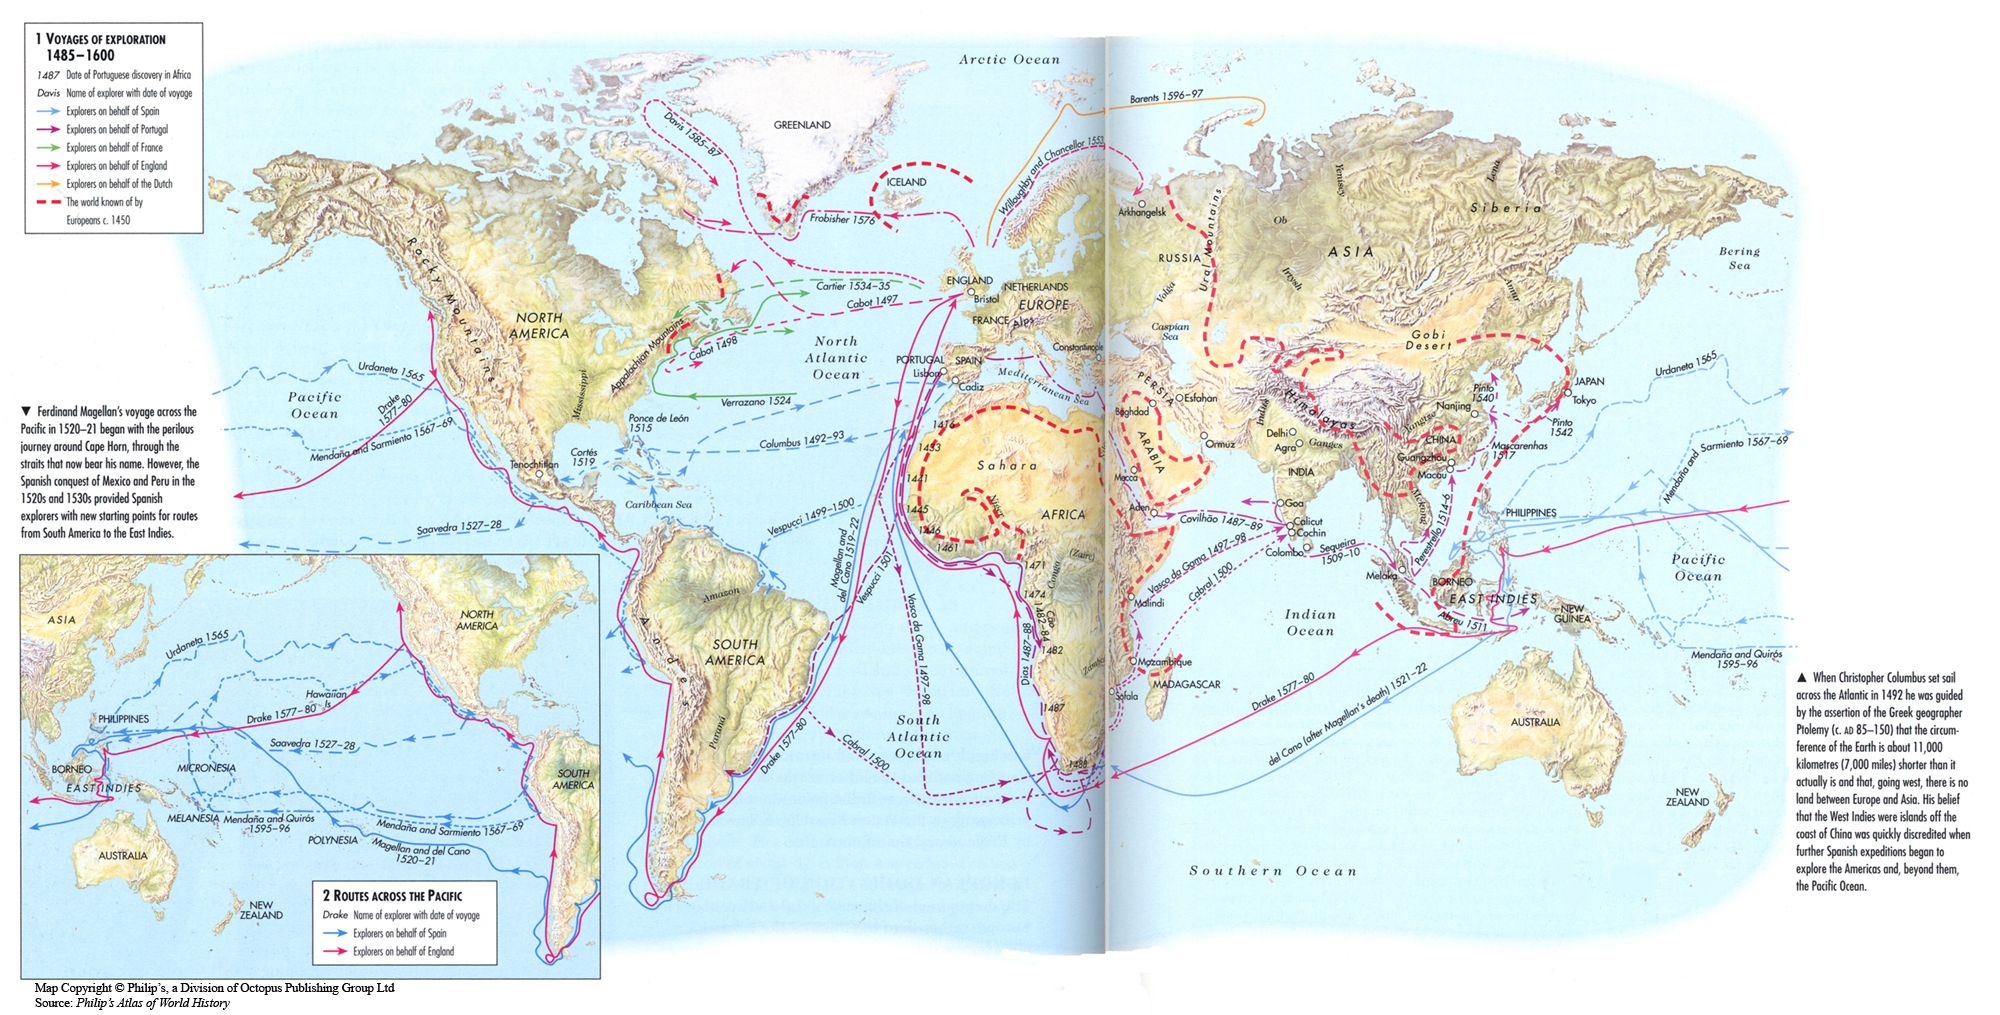 8 voyages of discovery map